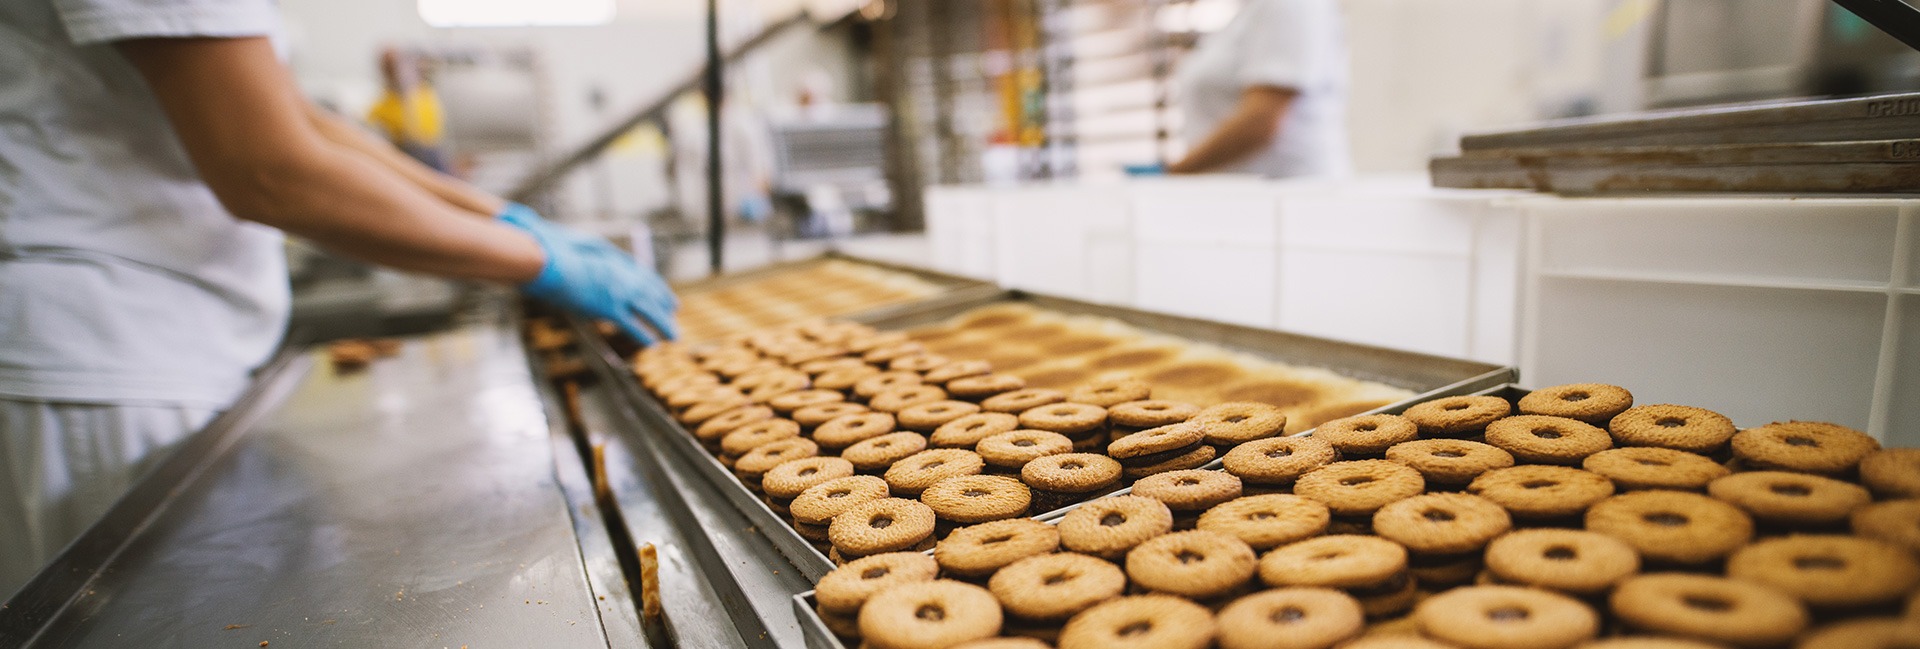 An employee working at a cookies factory